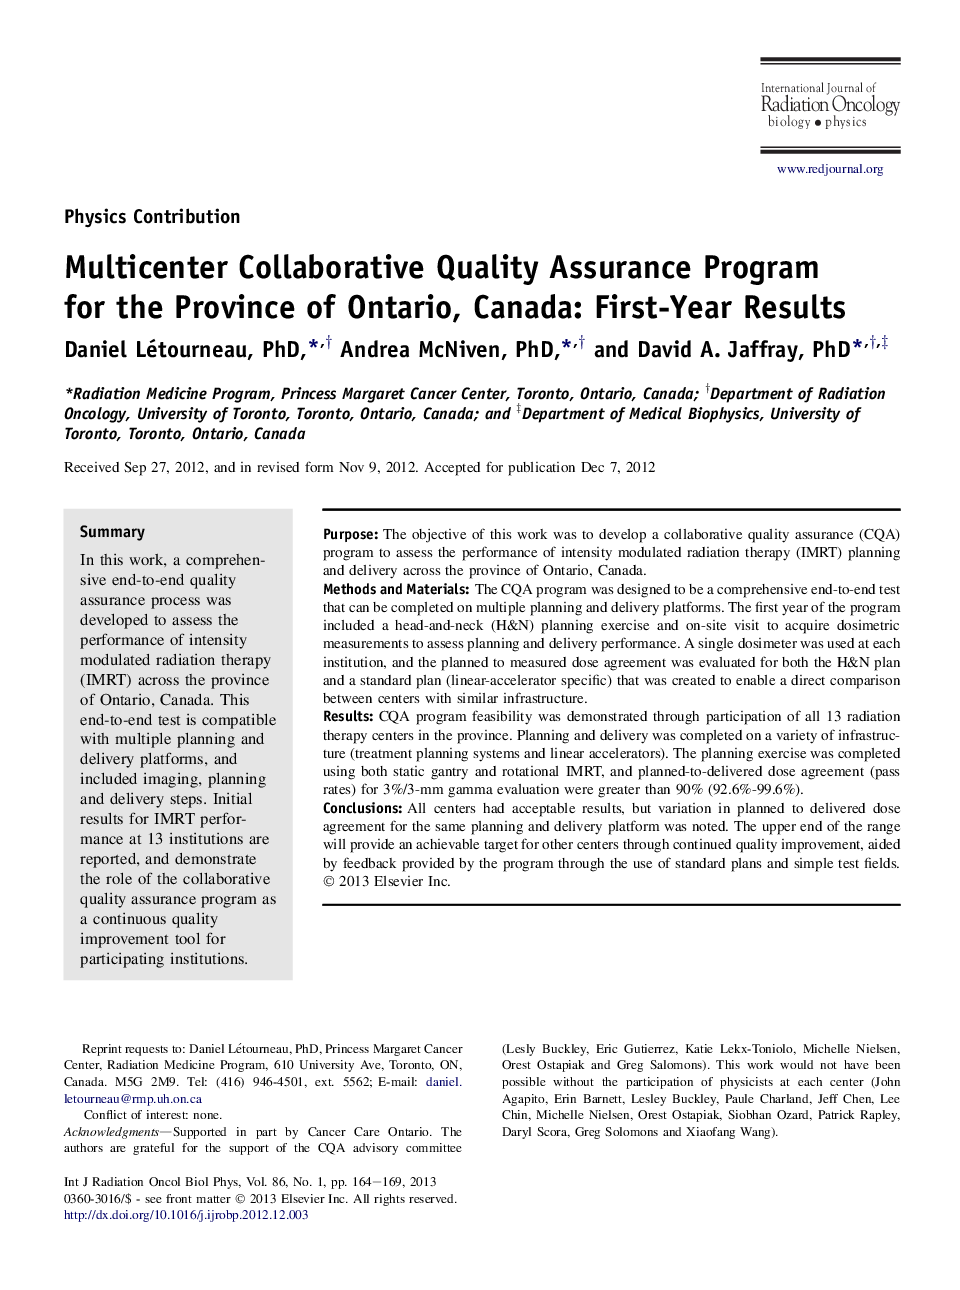 Multicenter Collaborative Quality Assurance Program for the Province of Ontario, Canada: First-Year Results